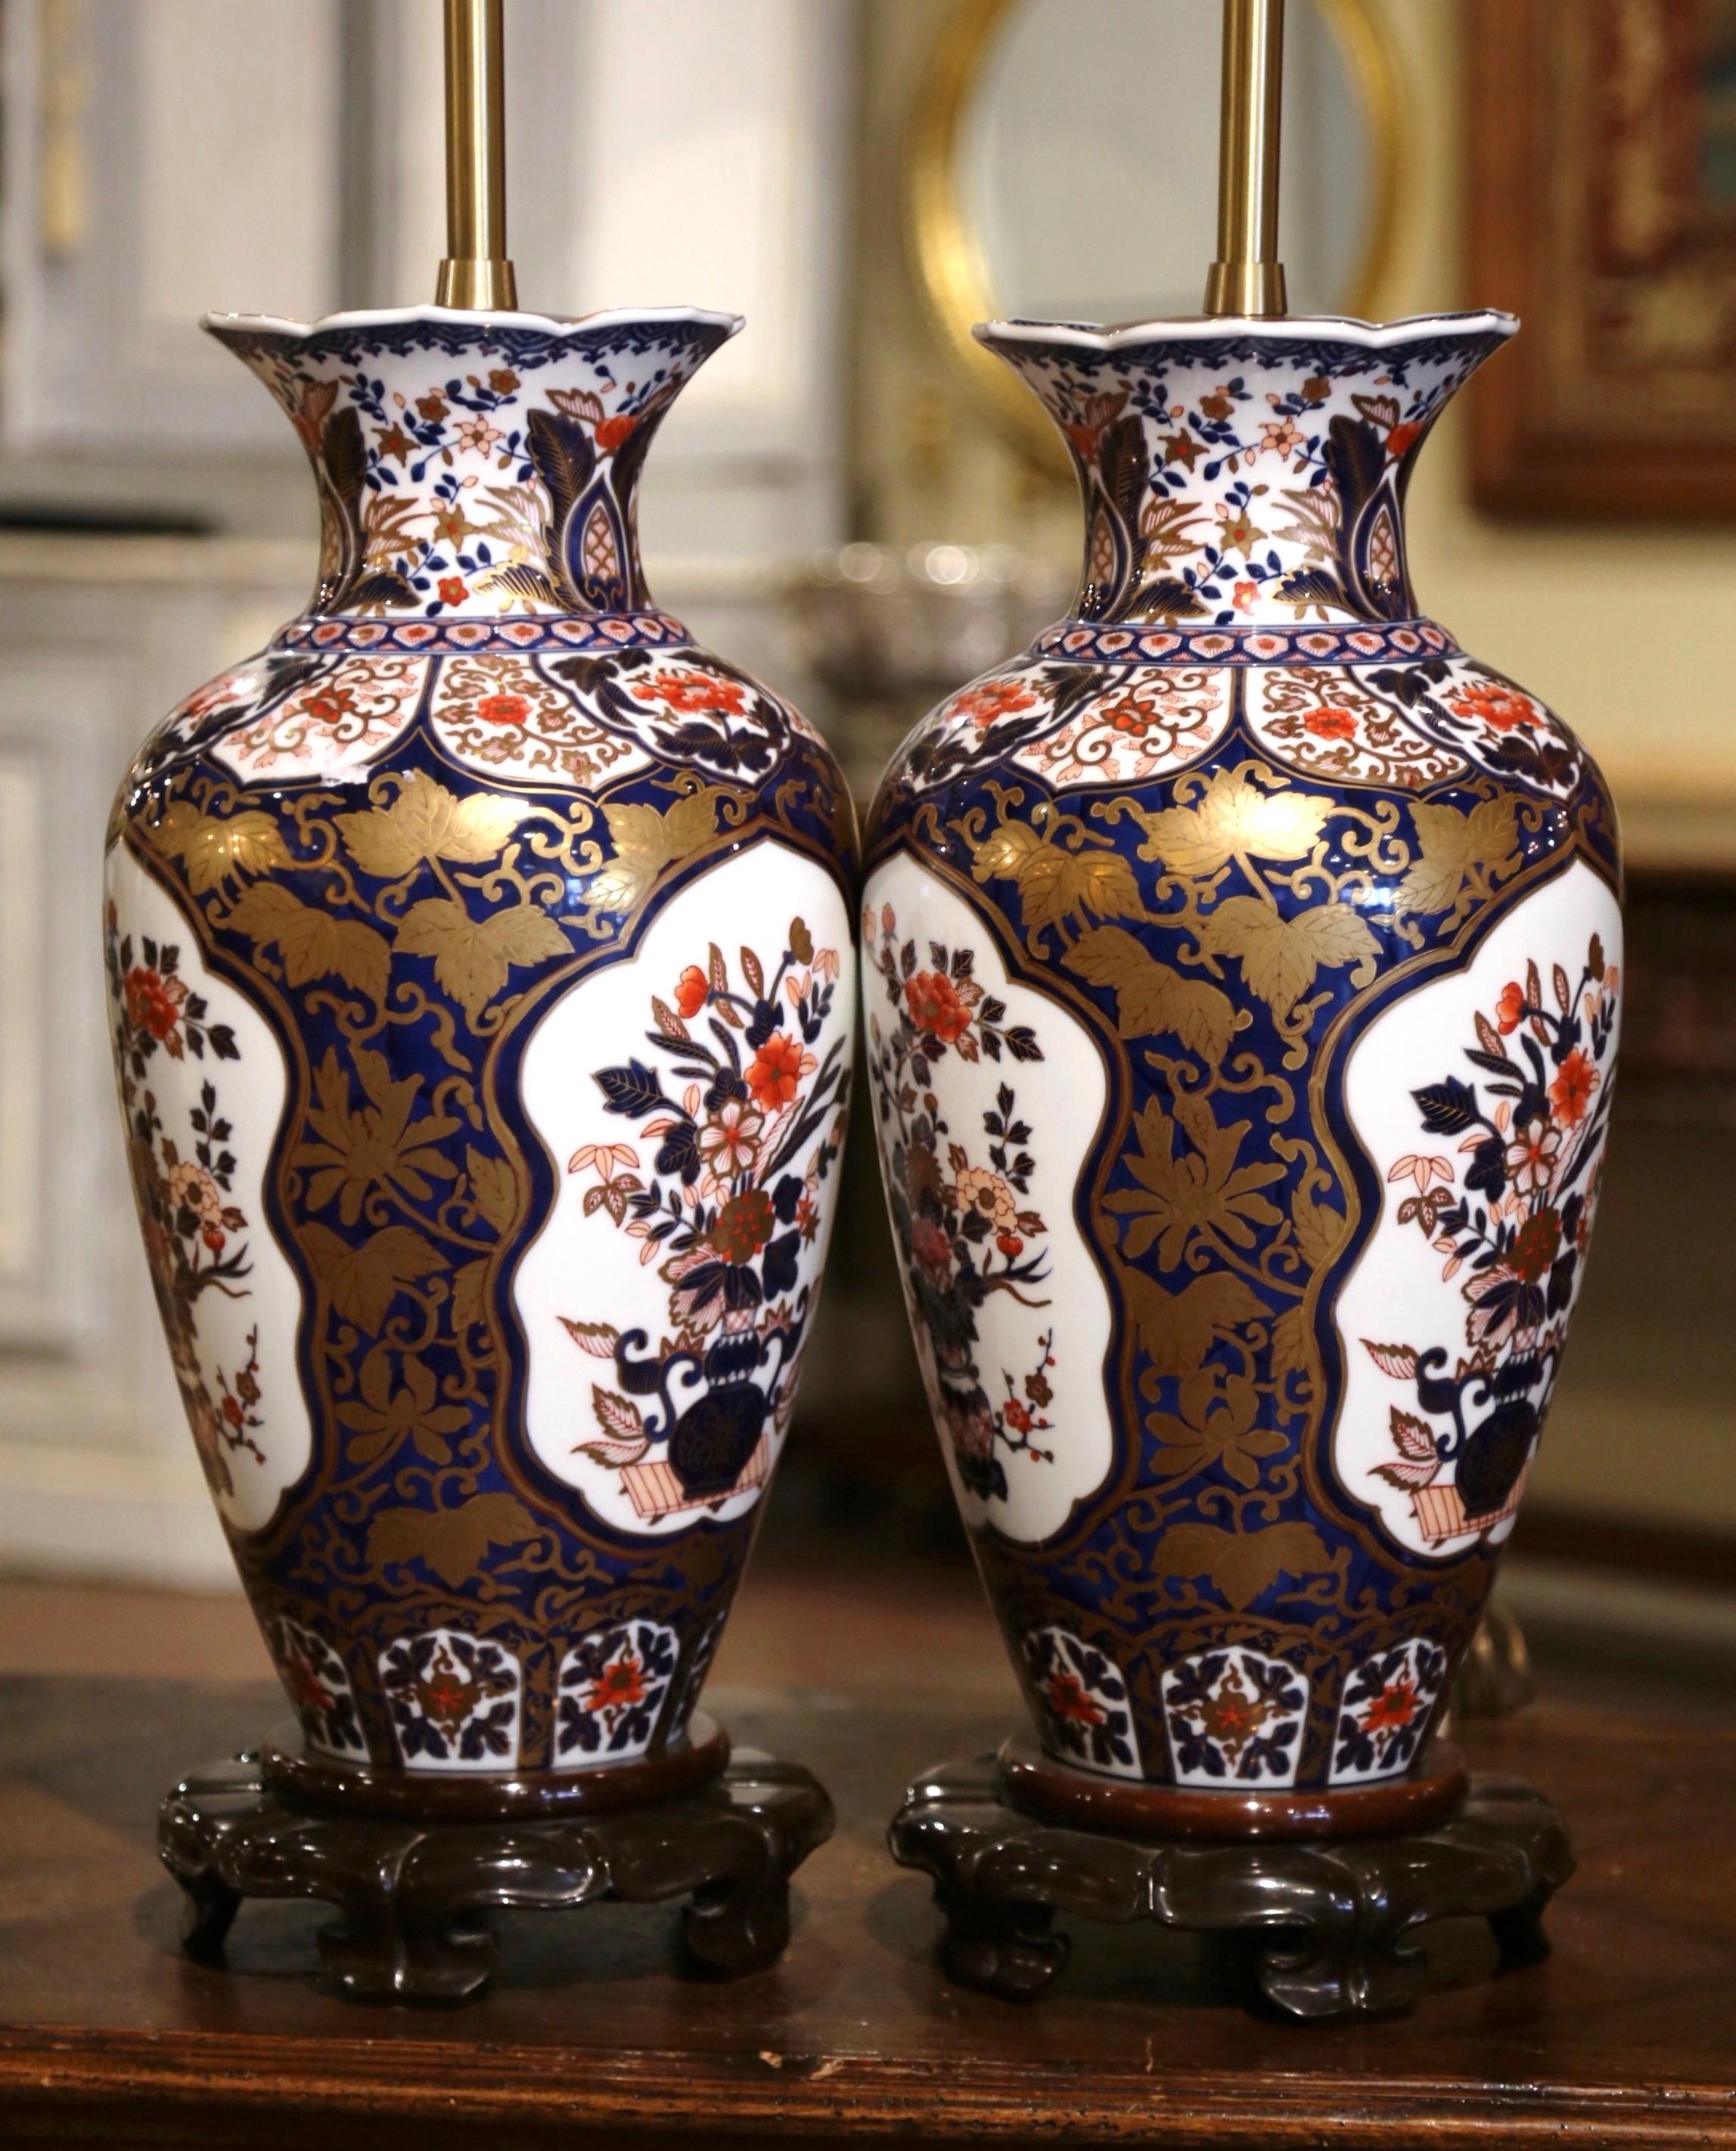 Pair of Early 20th Century Imari Porcelain Vases Mounted as Table Lamps  For Sale 7